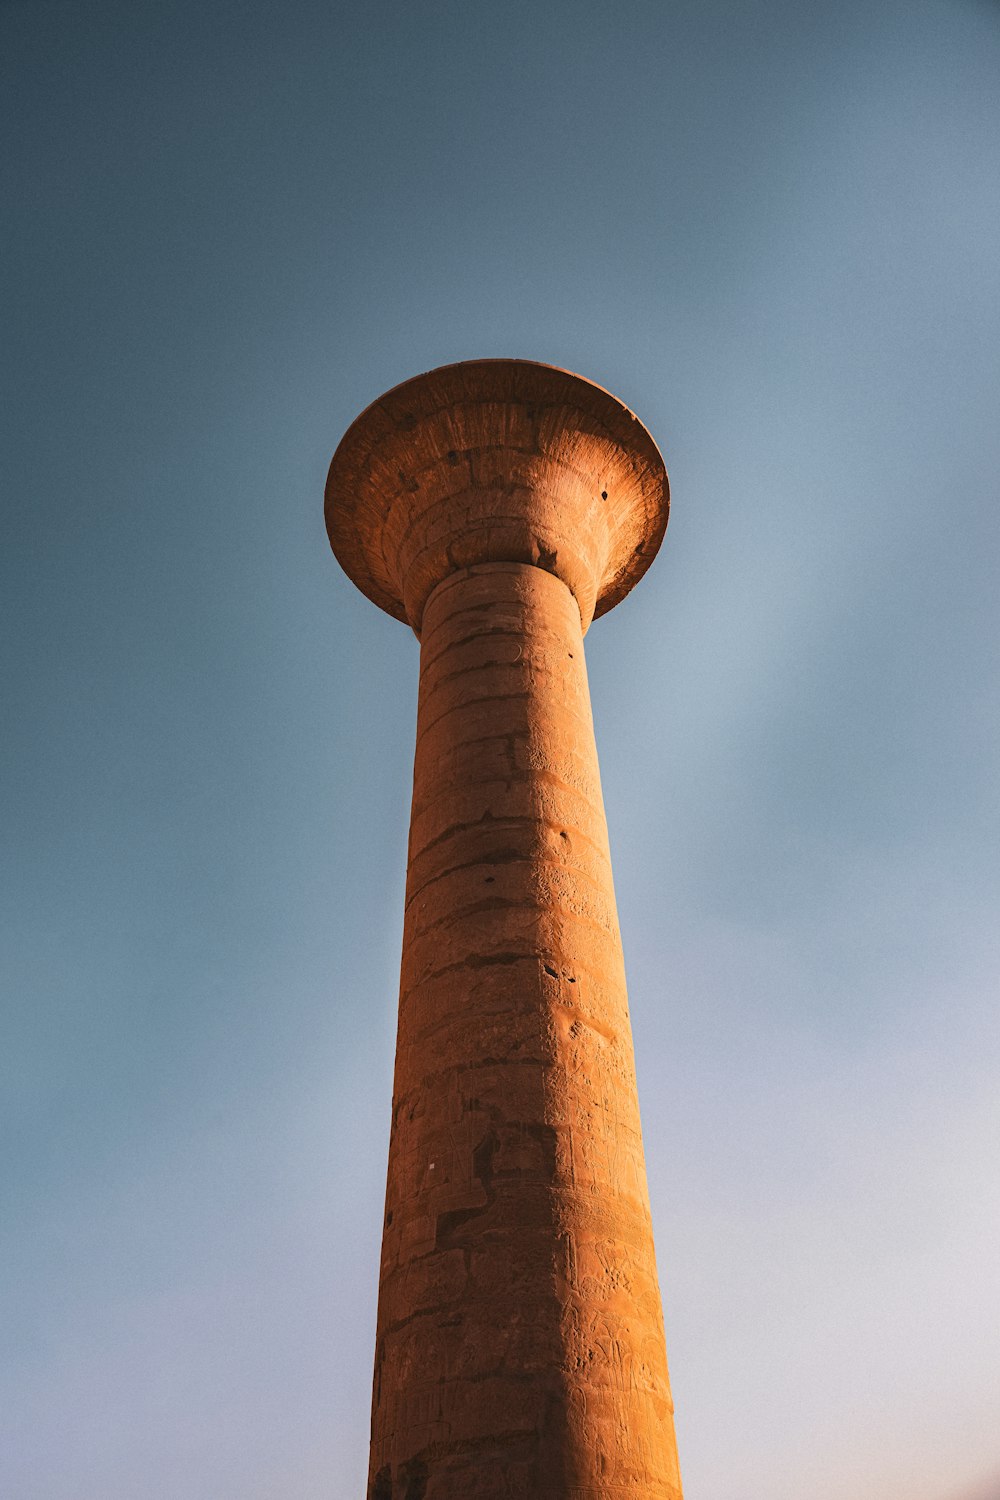 a tall brick tower with a sky background